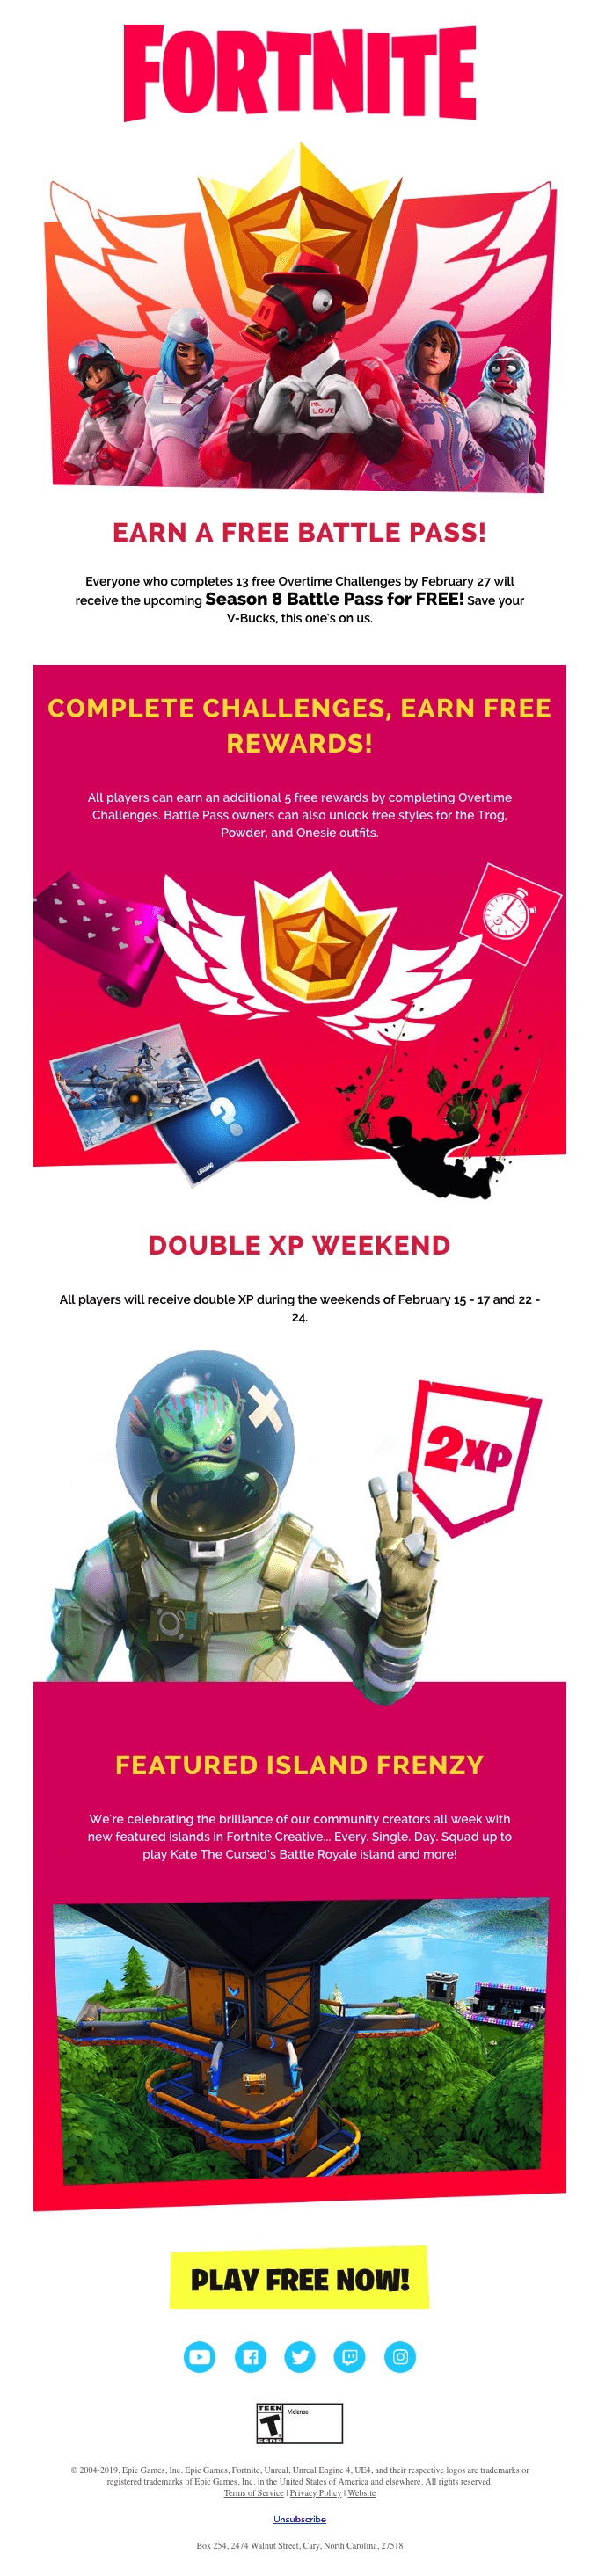 This email from Fortnite offers incentives to keep users engaged.